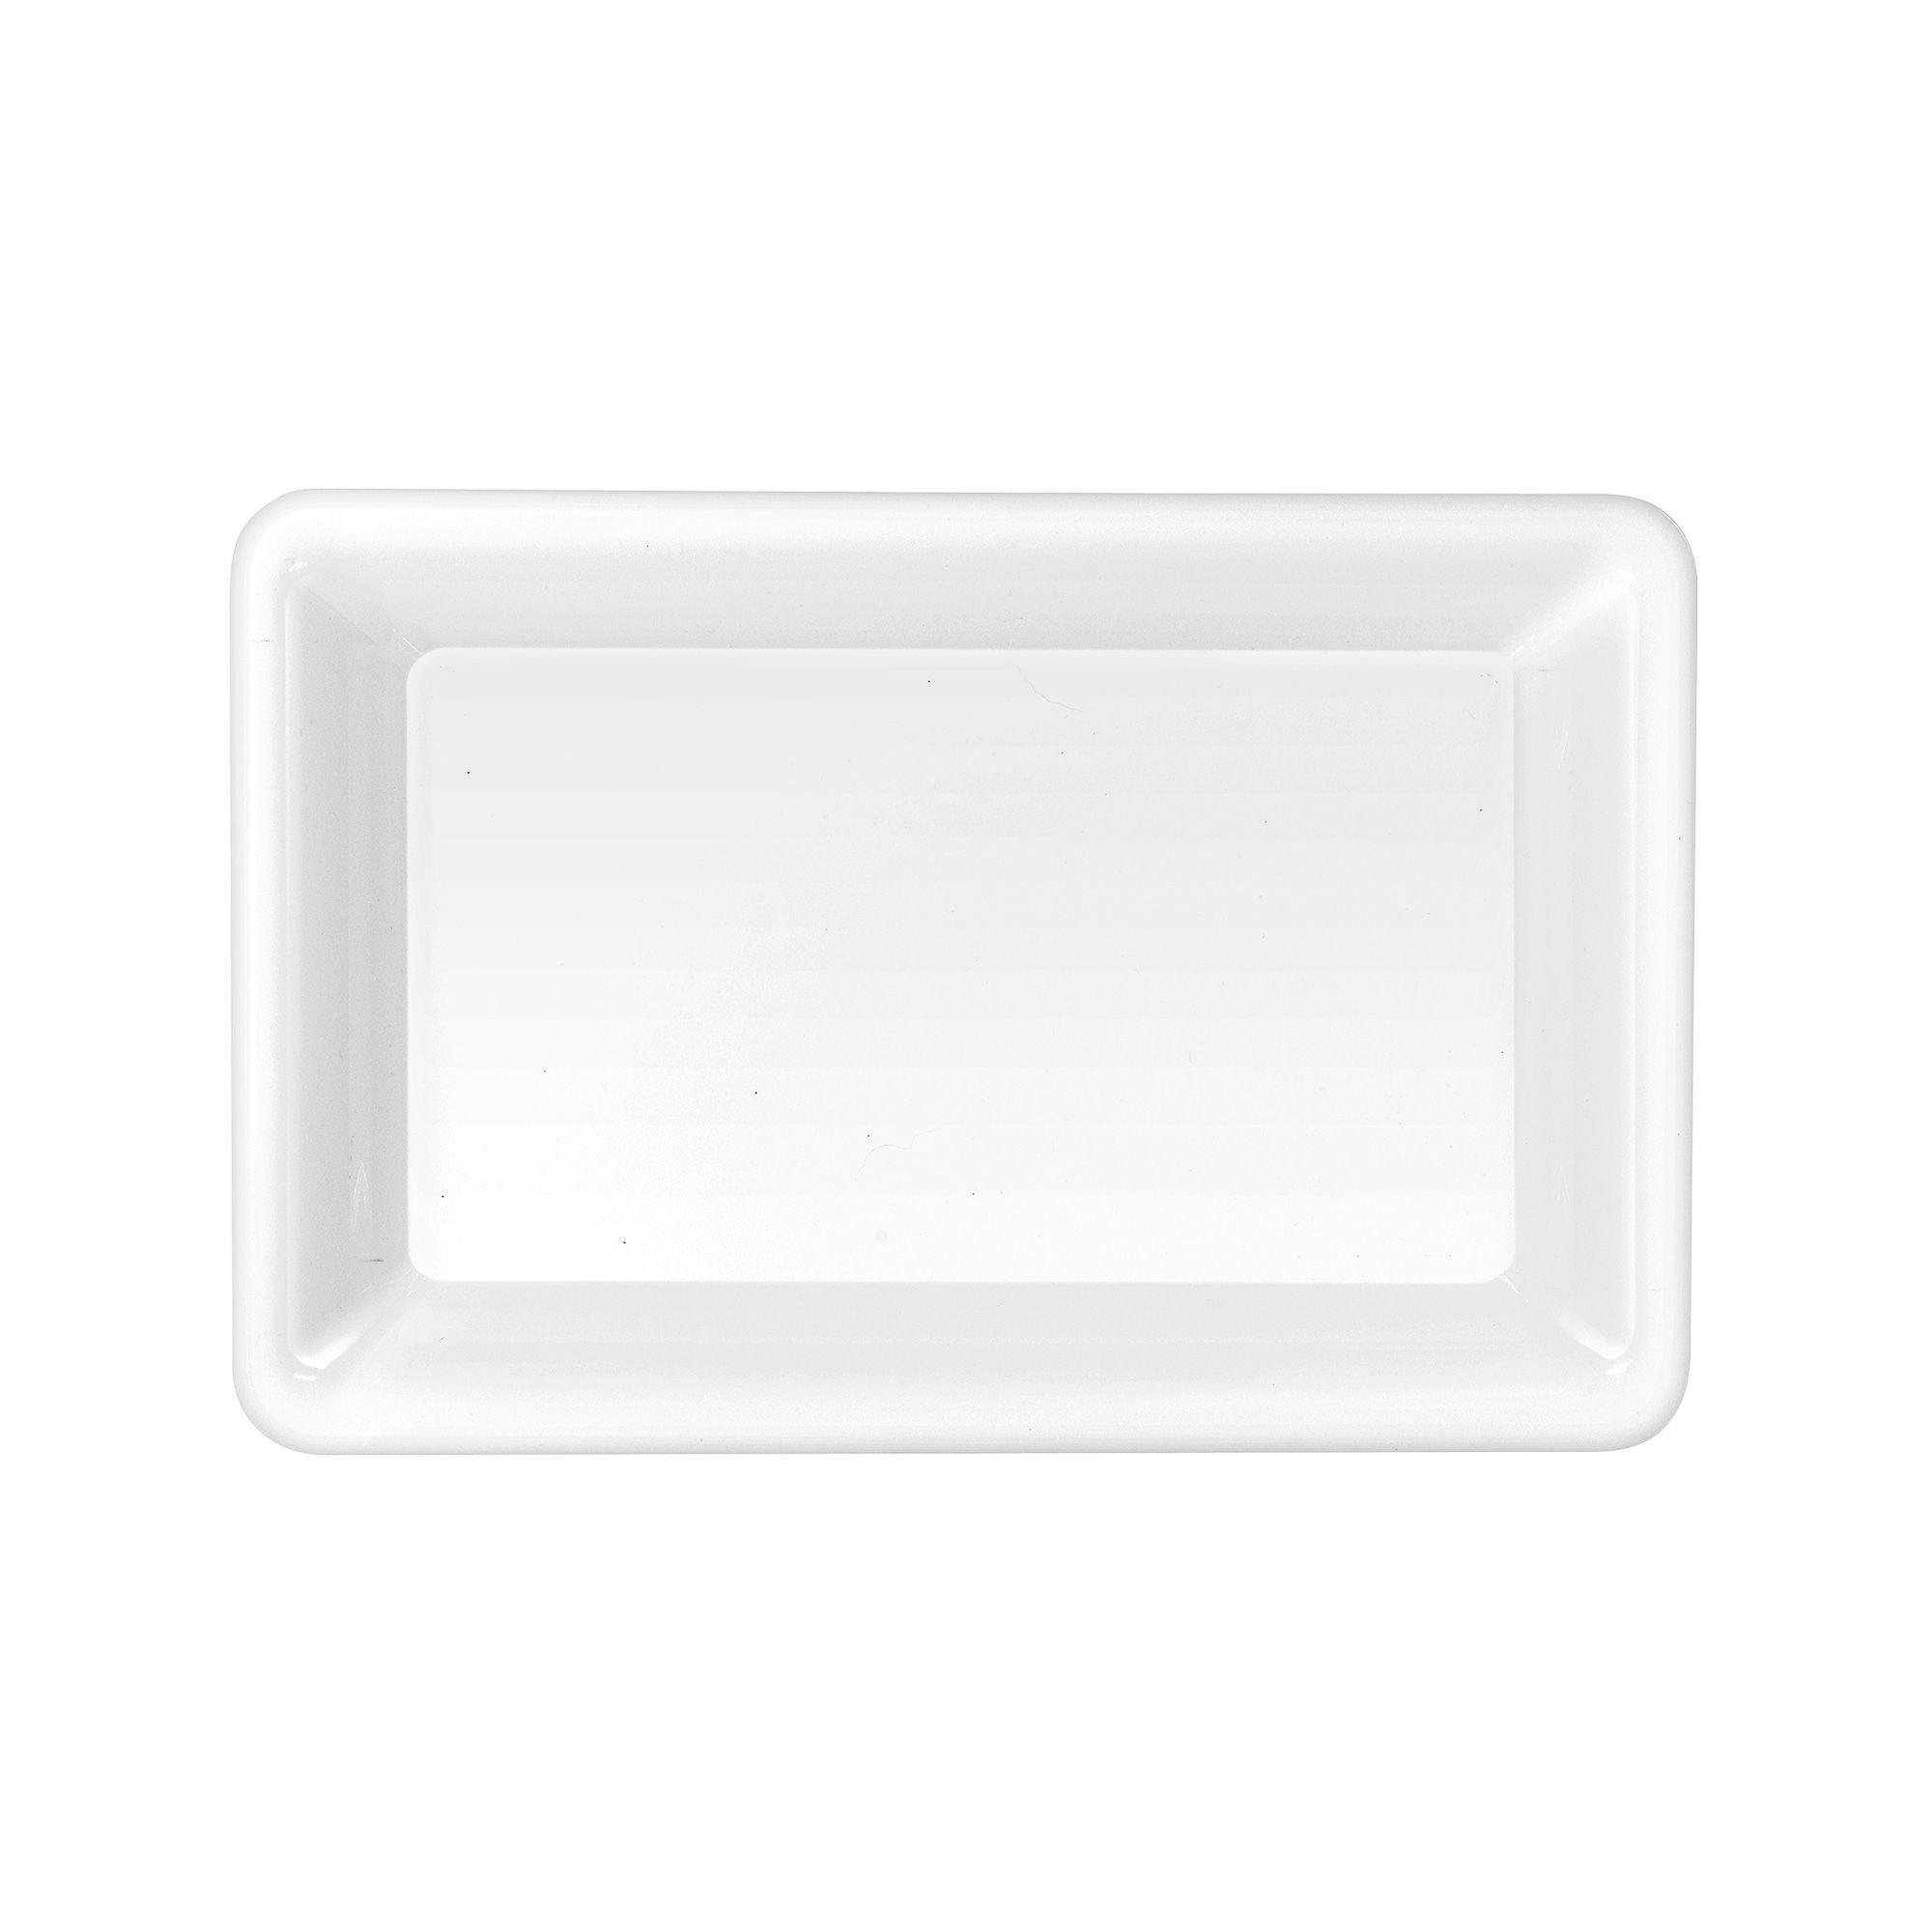 4 10 x 14 Rectangle Serving Trays with Lid, Plastic Tray and Lid Large  Plastic Party Platters with Clear Lids White Catering Trays, Serving Trays